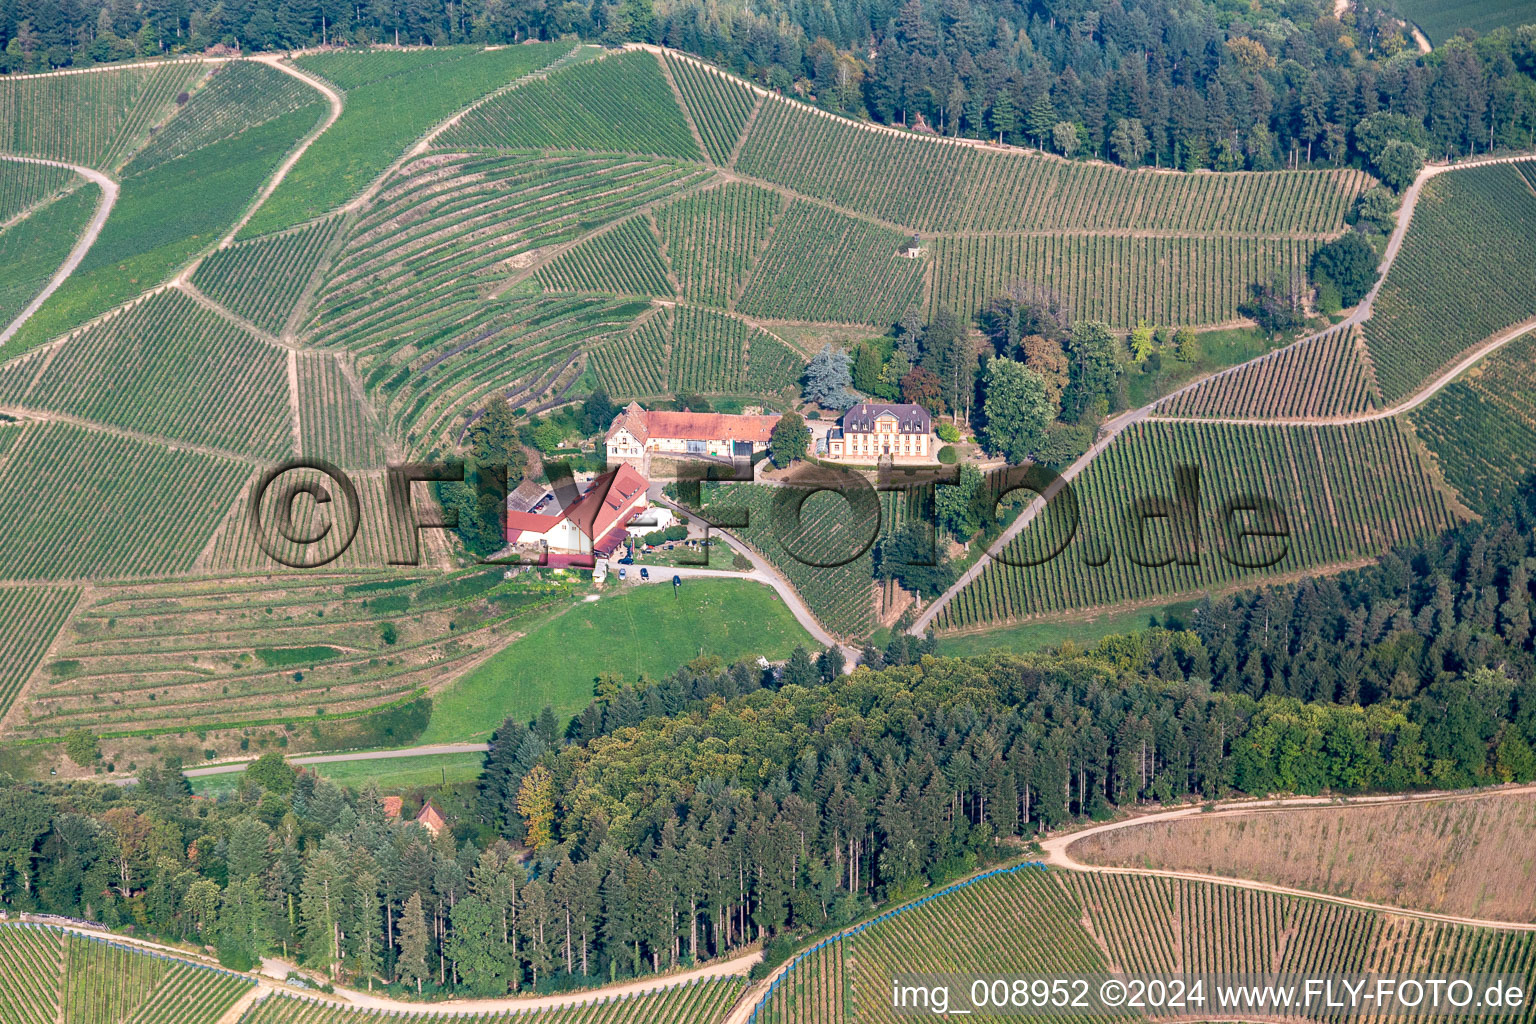 Winery and guest house Winzerhof on the edge of vineyards and in Durbach in the state Baden-Wuerttemberg, Germany